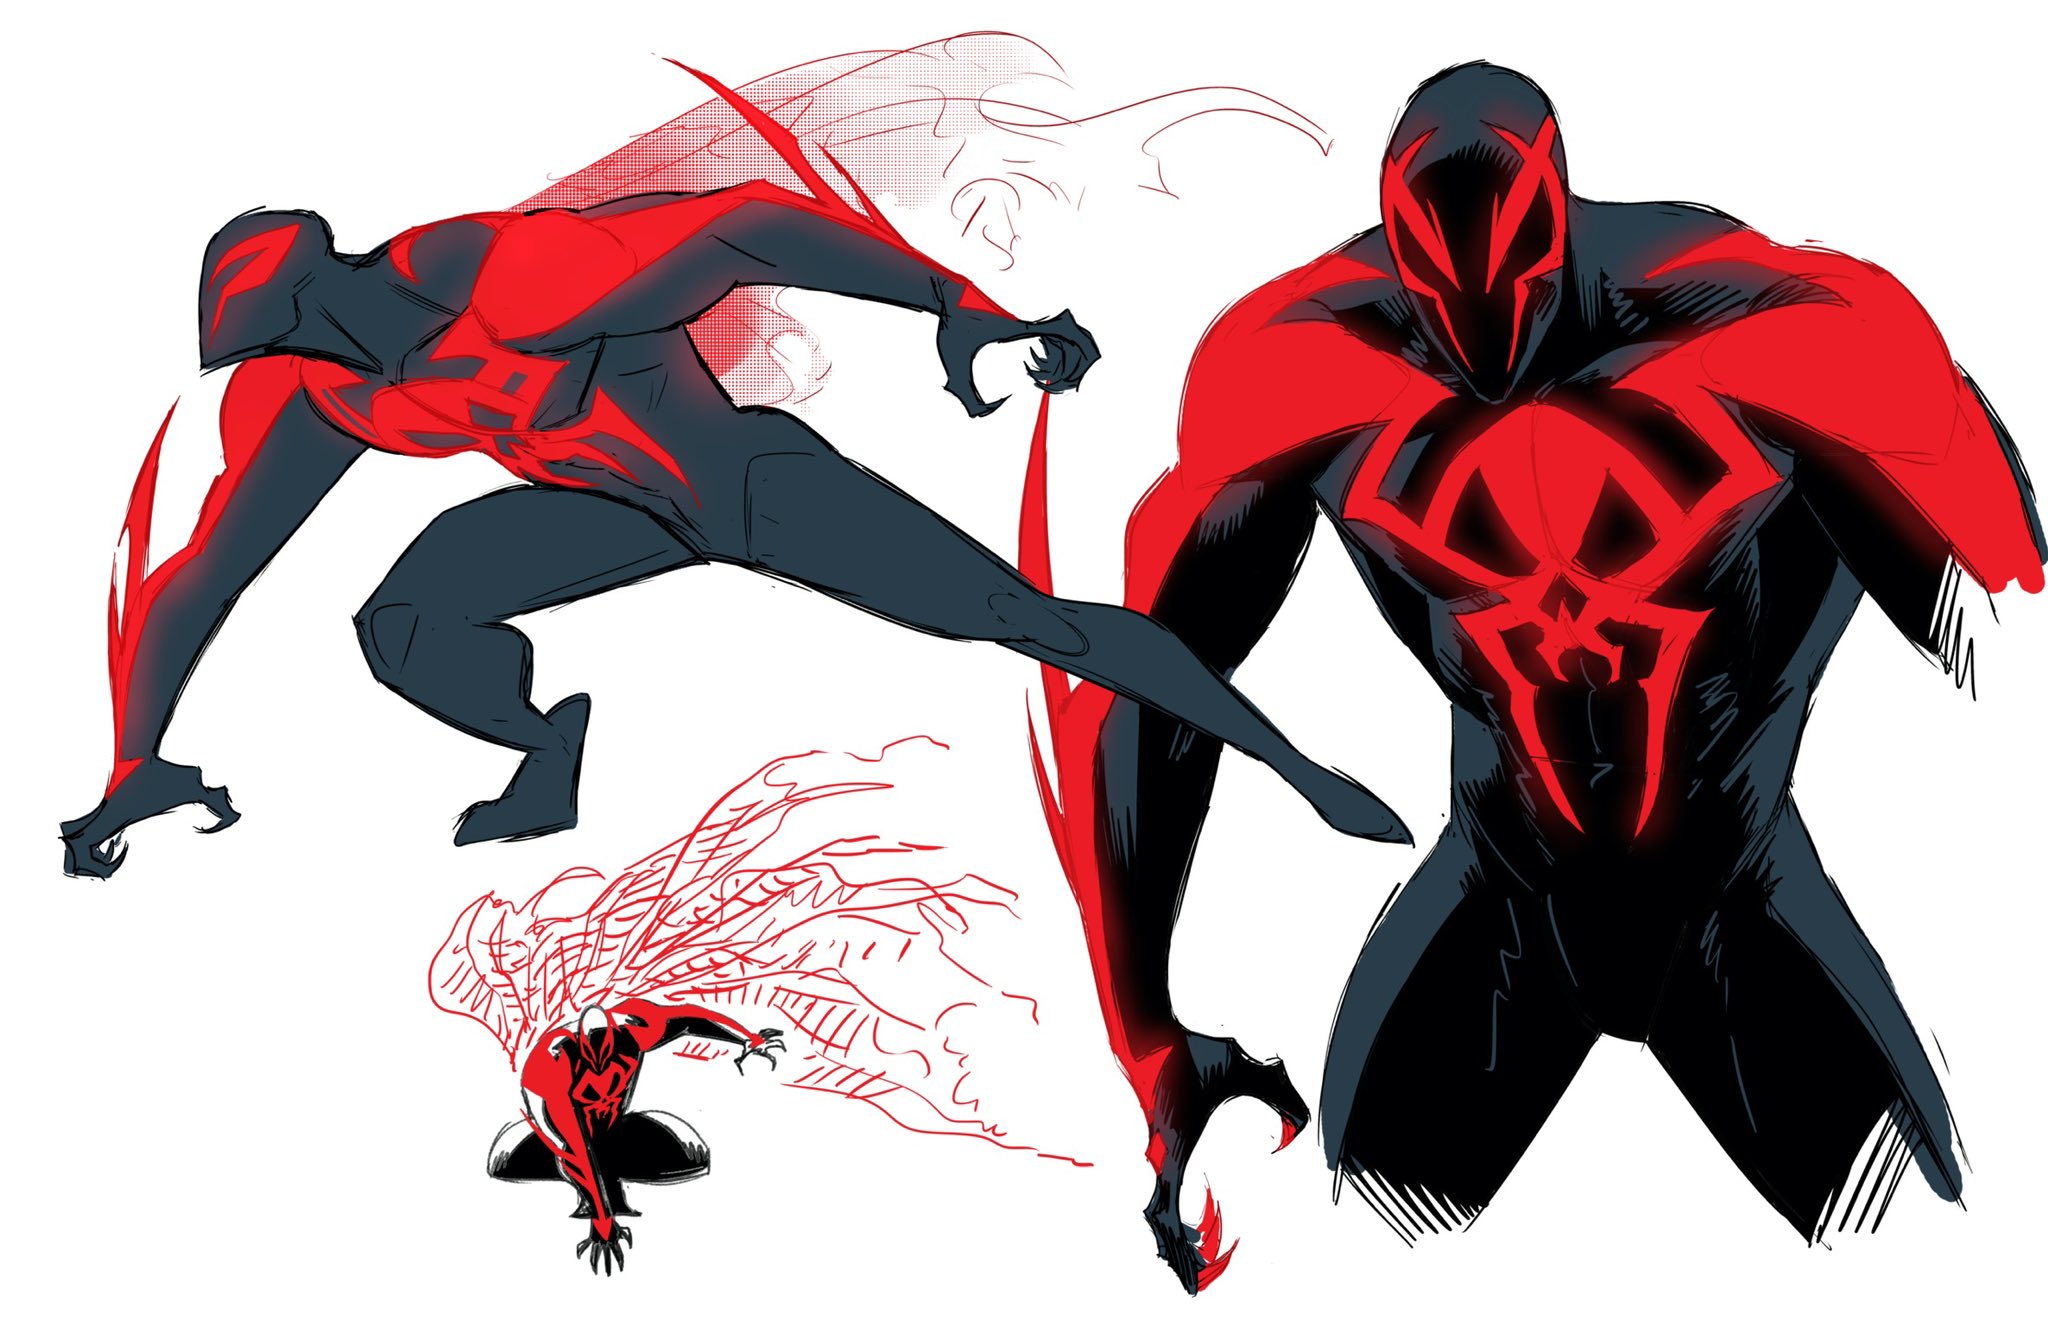 Welcoming new friends to our imagined Spider Society. See more custom  #SpiderVerse #Spidersona art! (🎨: @kristaferanka)